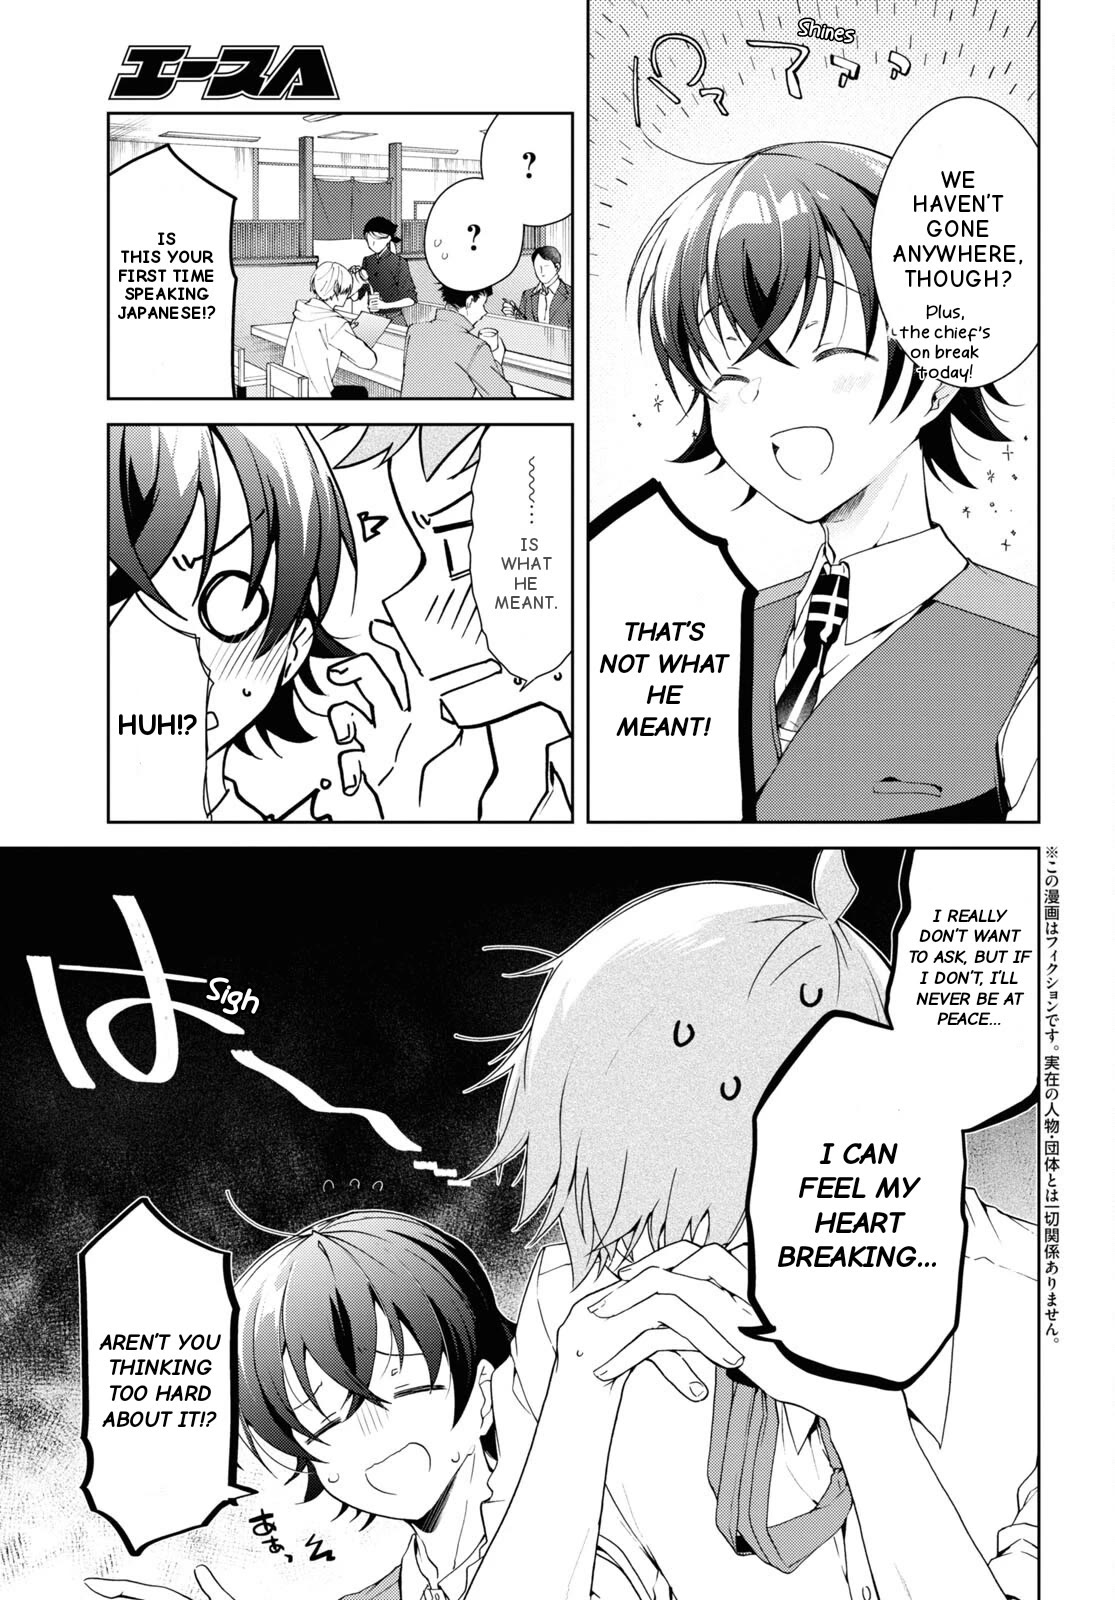 Isshiki-san Wants to Know About Love. - chapter 28 - #5